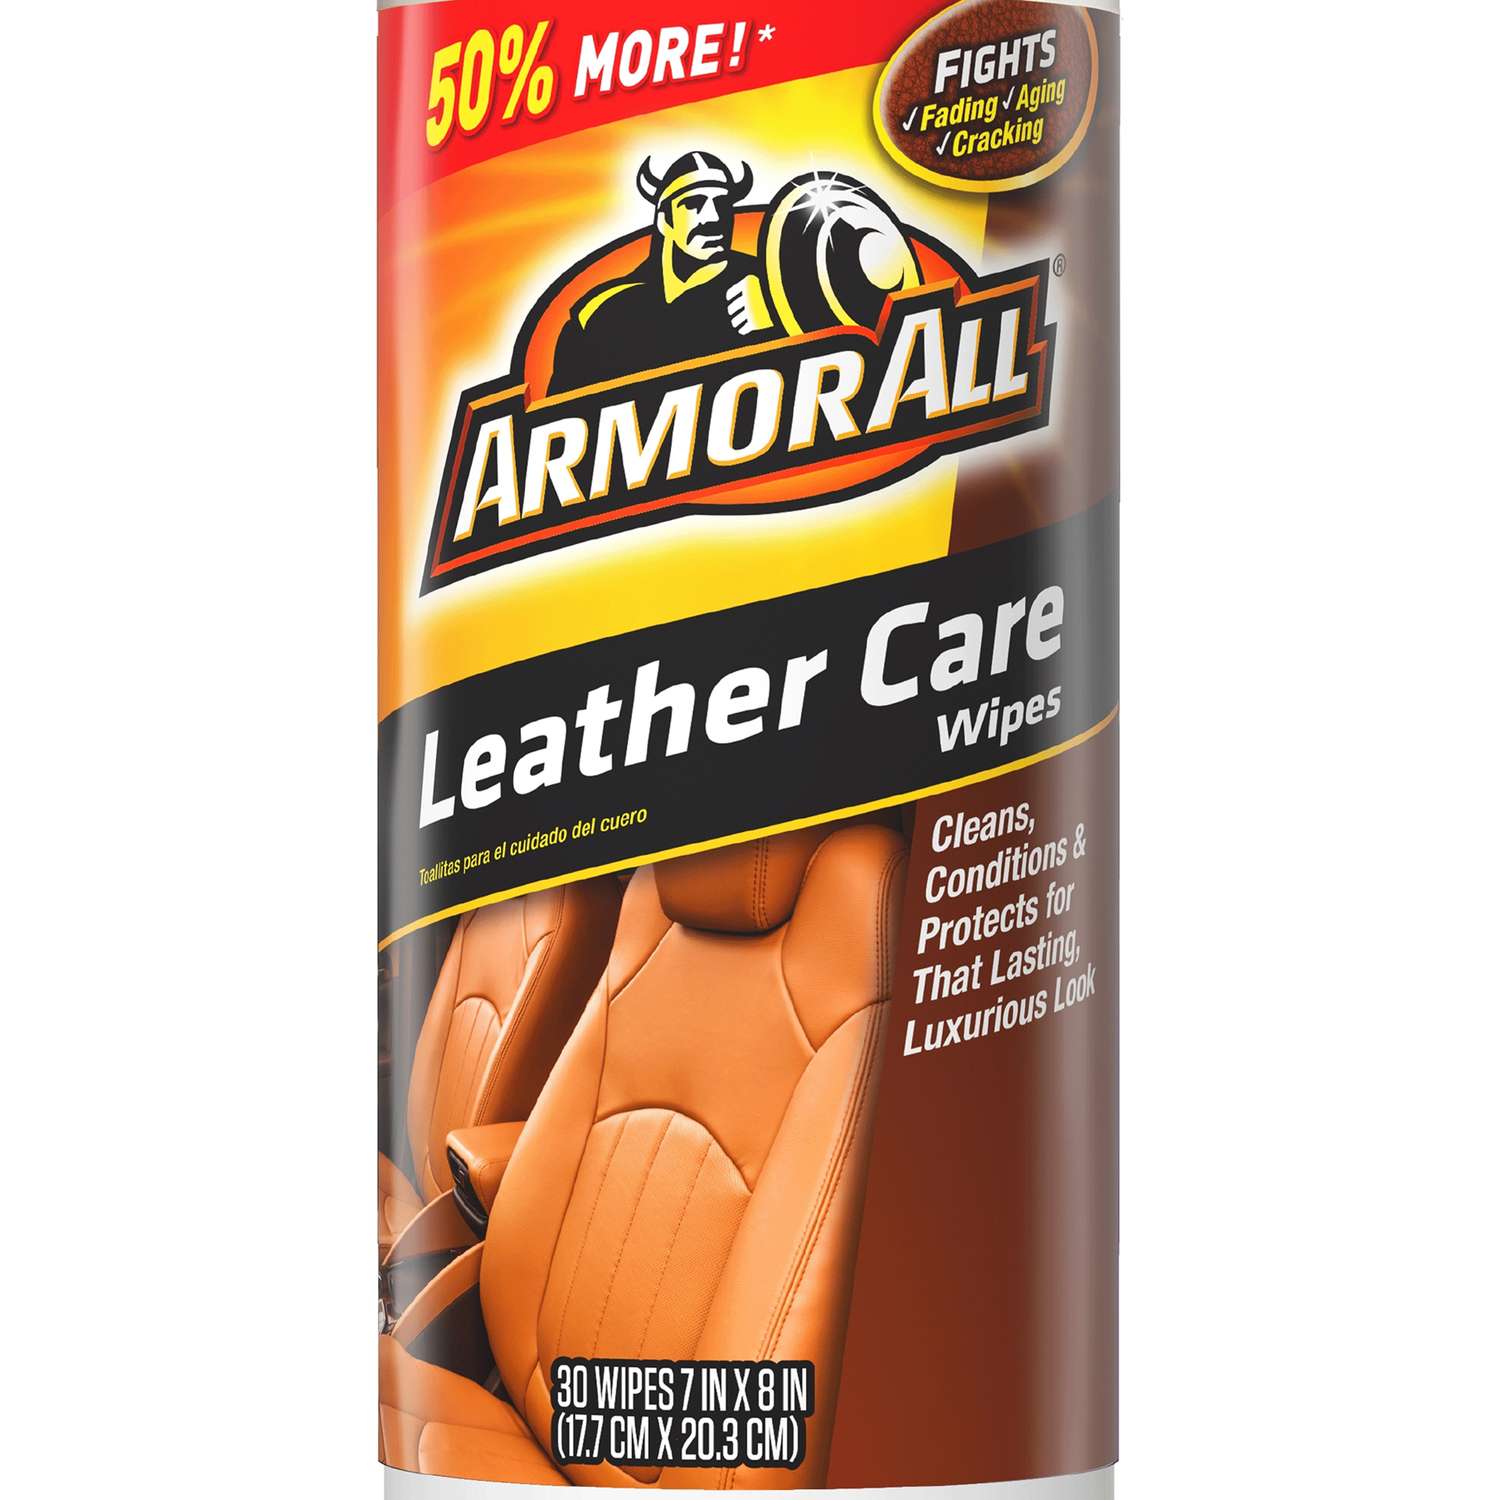 Armor All Leather Care Wipes 30 ct